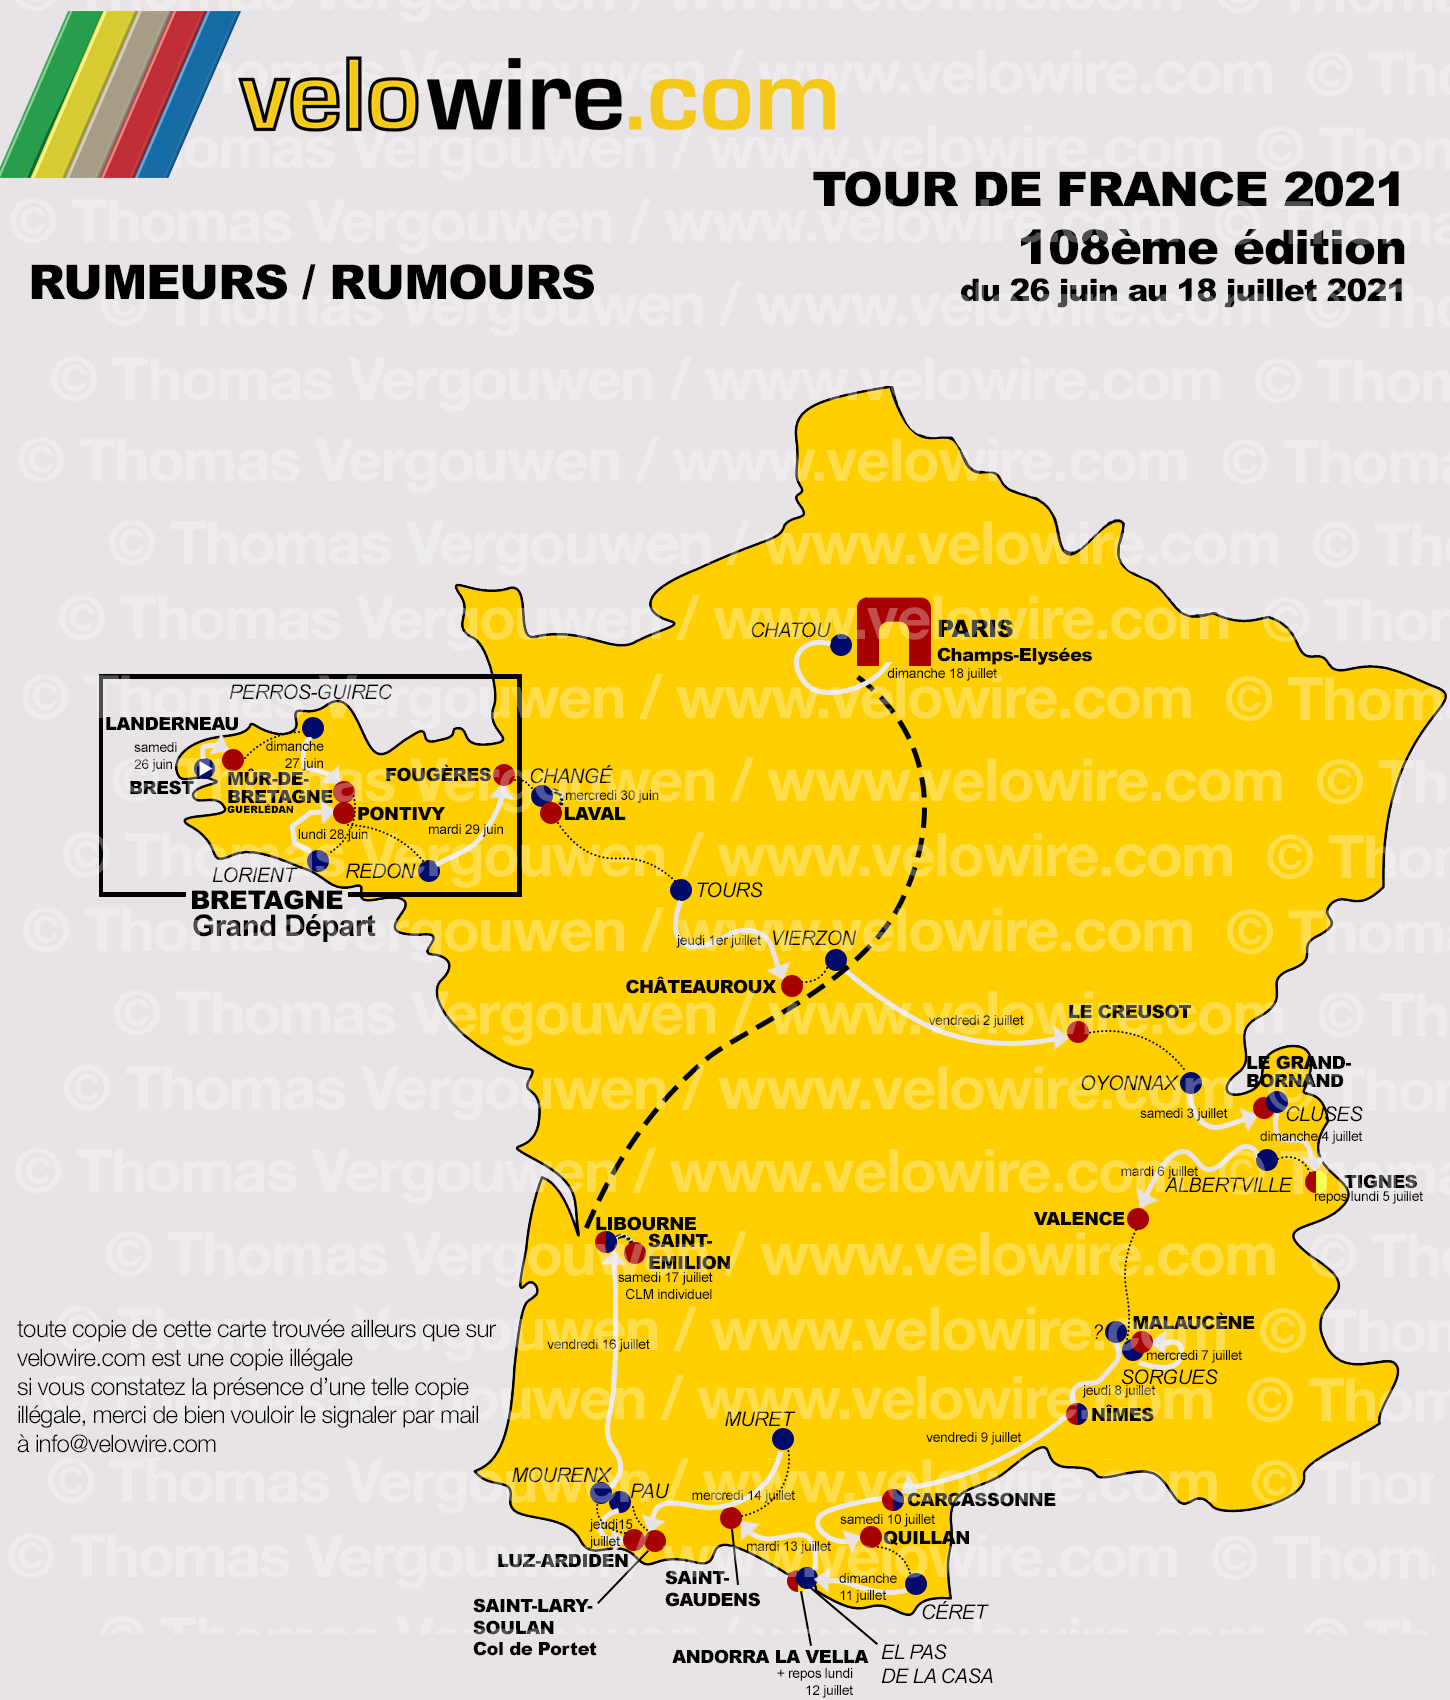 Tour de France 2021: the rumours about the race route and ...